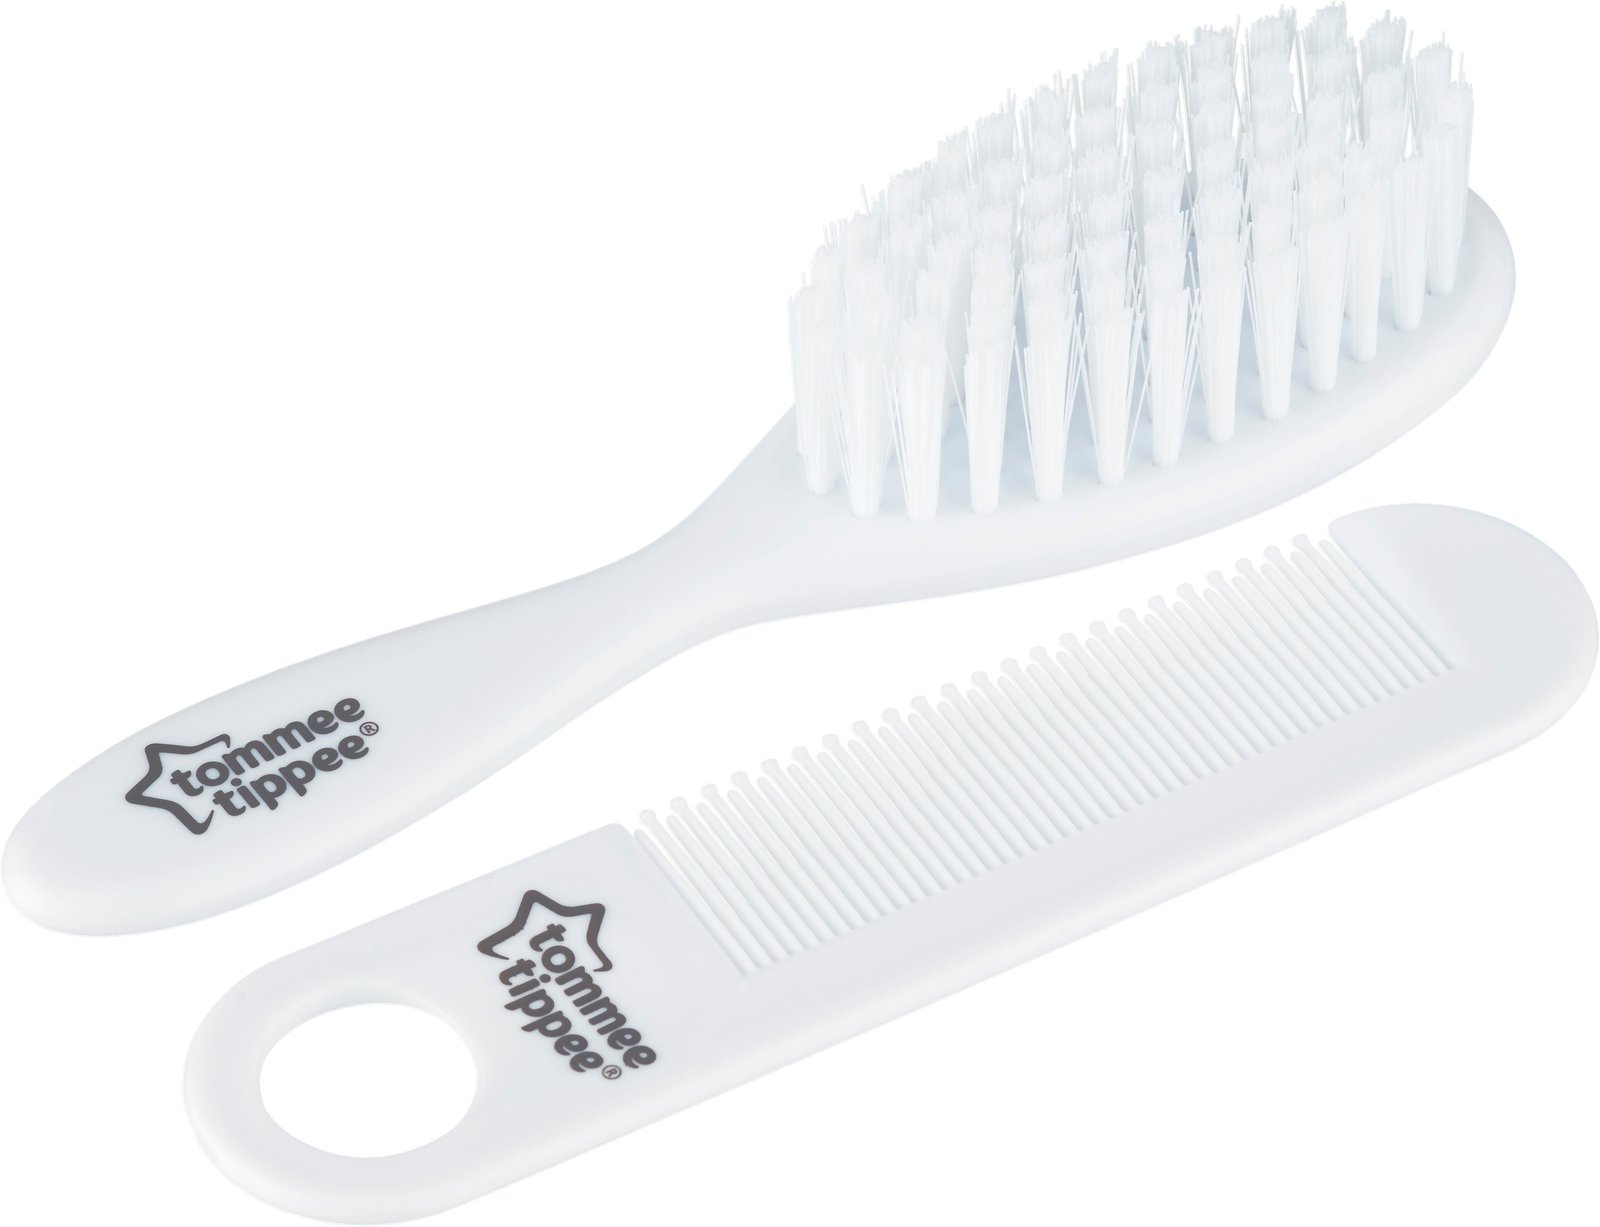 Tommee Tippee Ess entials Brush & Comb Set